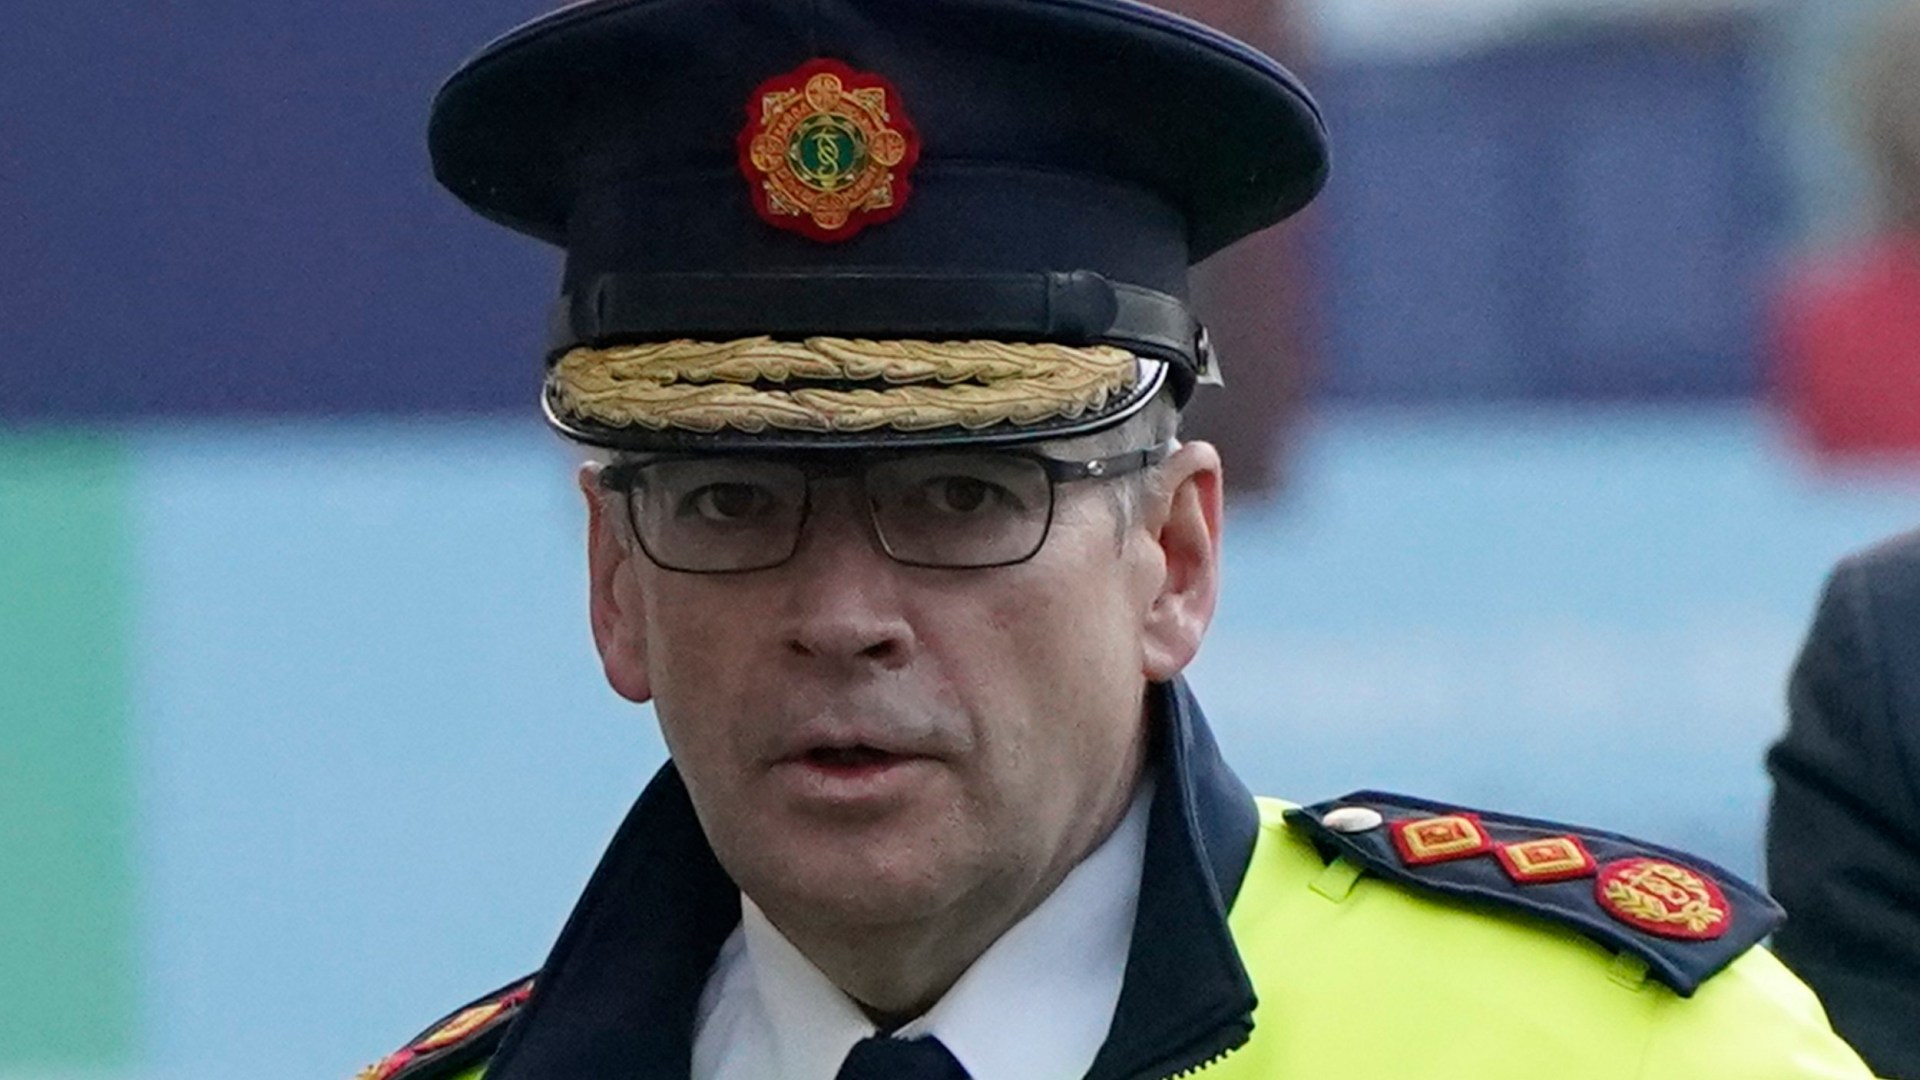 Major road safety clampdown as gardai ordered to carry out 30 minutes of ‘roads policing operations’ each shift [Video]